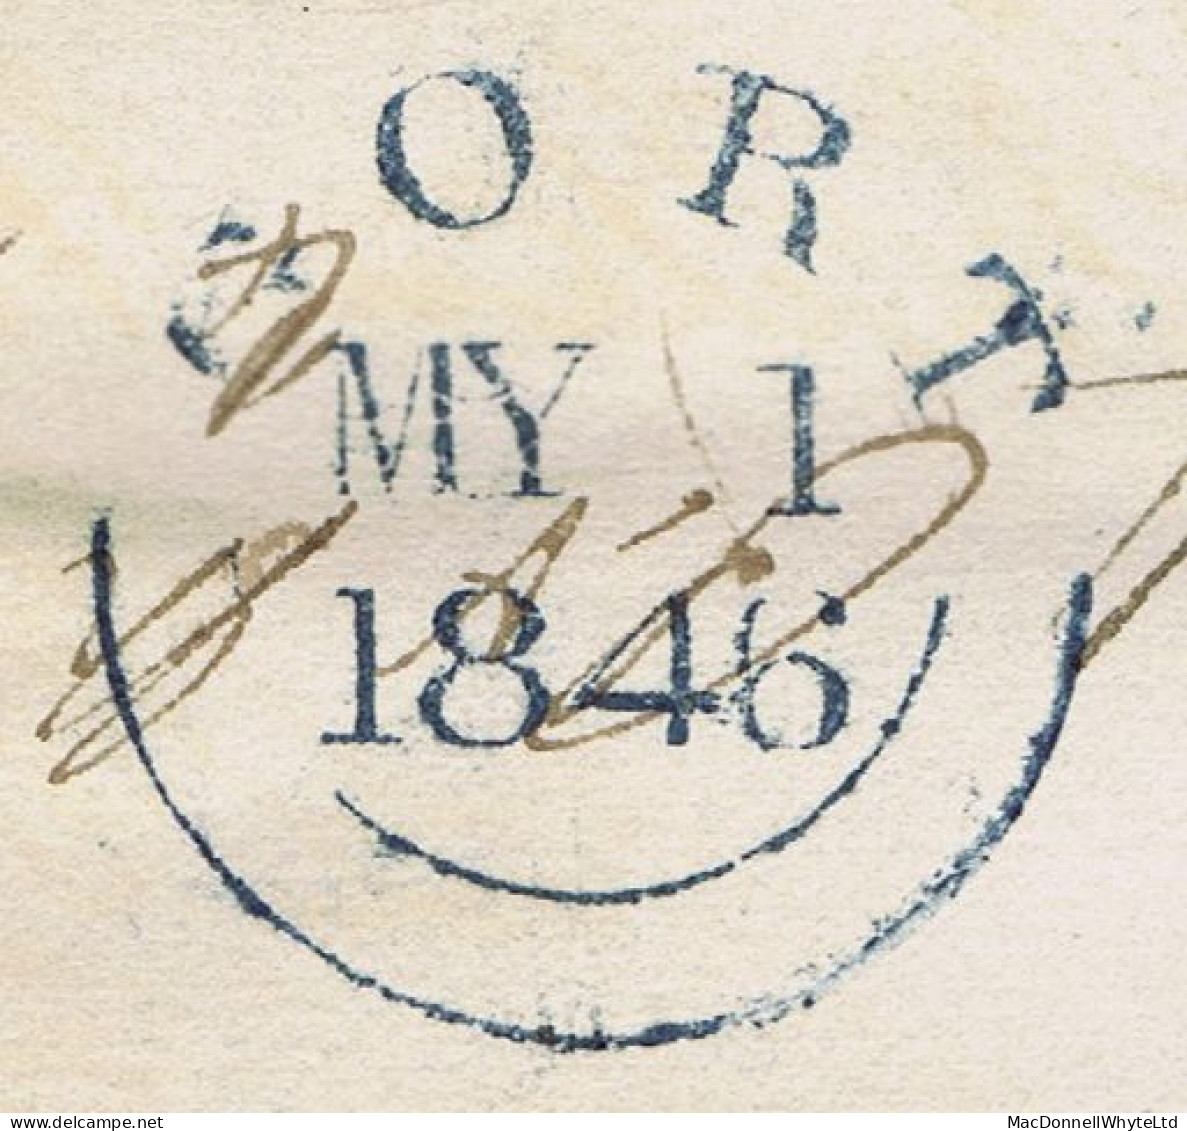 Ireland Galway Uniform Penny Post 1846 Cover To Military Dept London Boxed 2-line PAID AT GORT In Blue, GORT MY 1 1846 - Préphilatélie